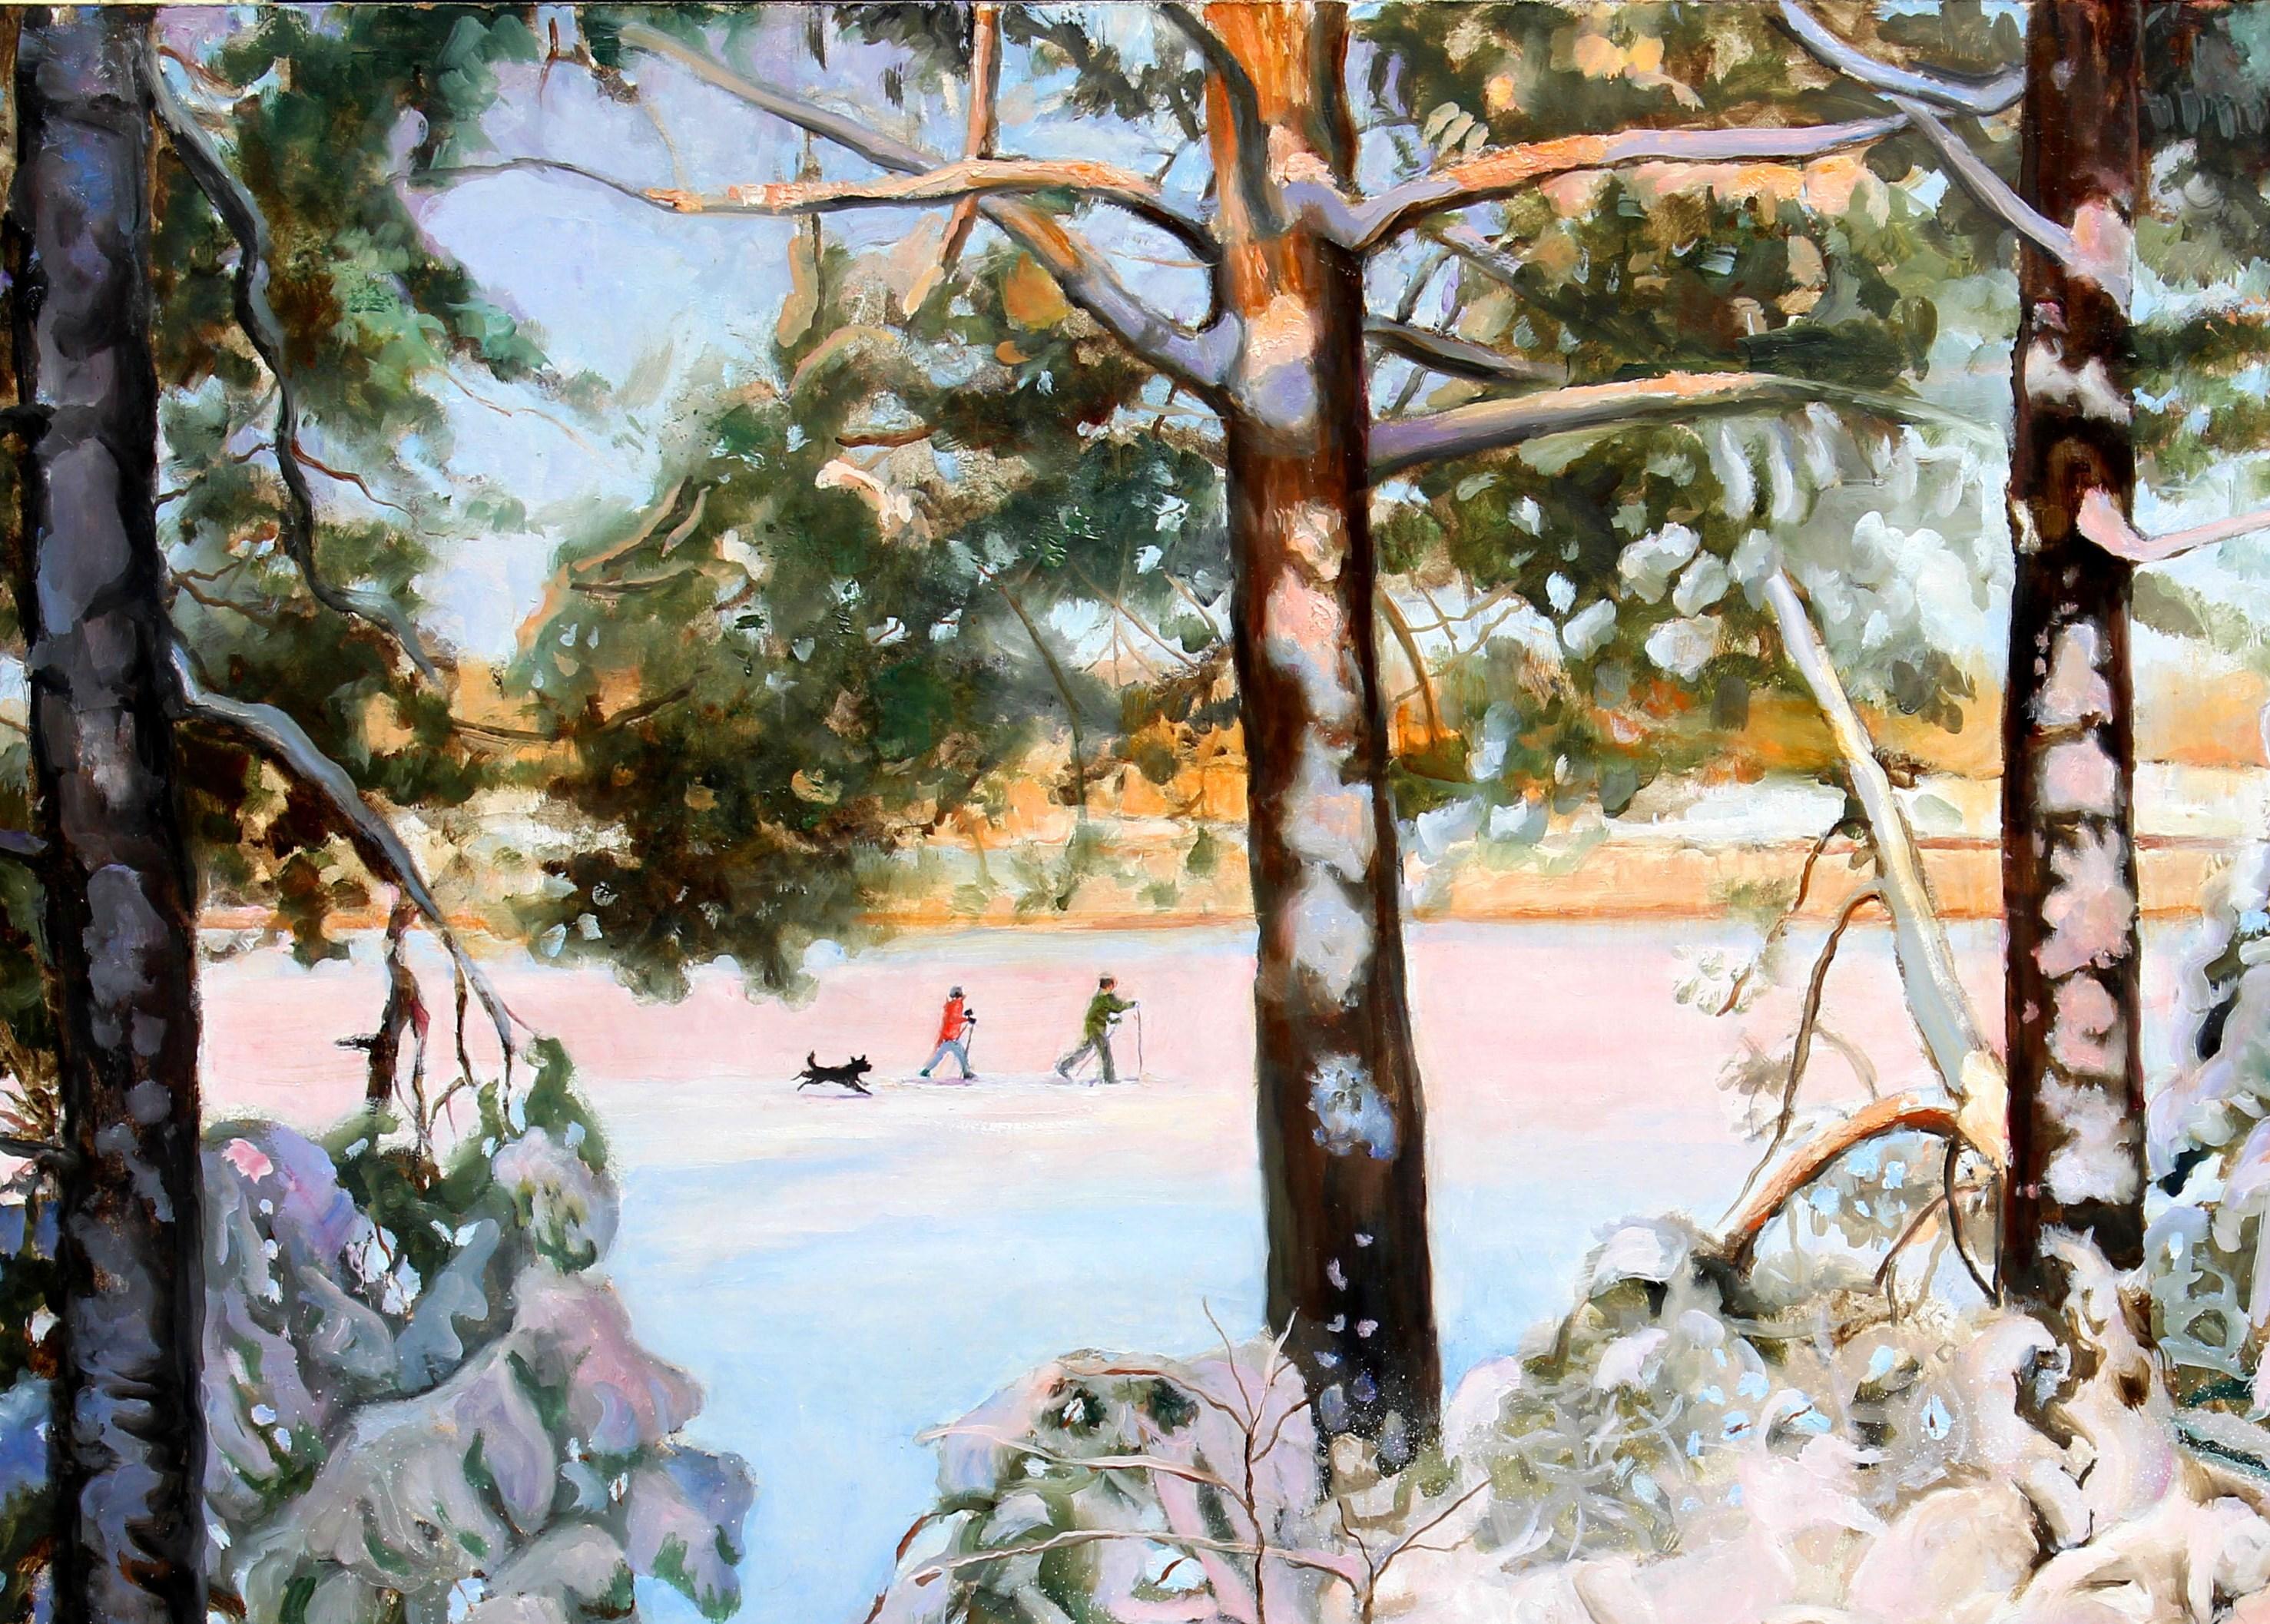 Beautiful Winter Landscape with Cross-Country Skiers and Dog Leaving Snow Tracks - Realist Painting by Beth Carlson